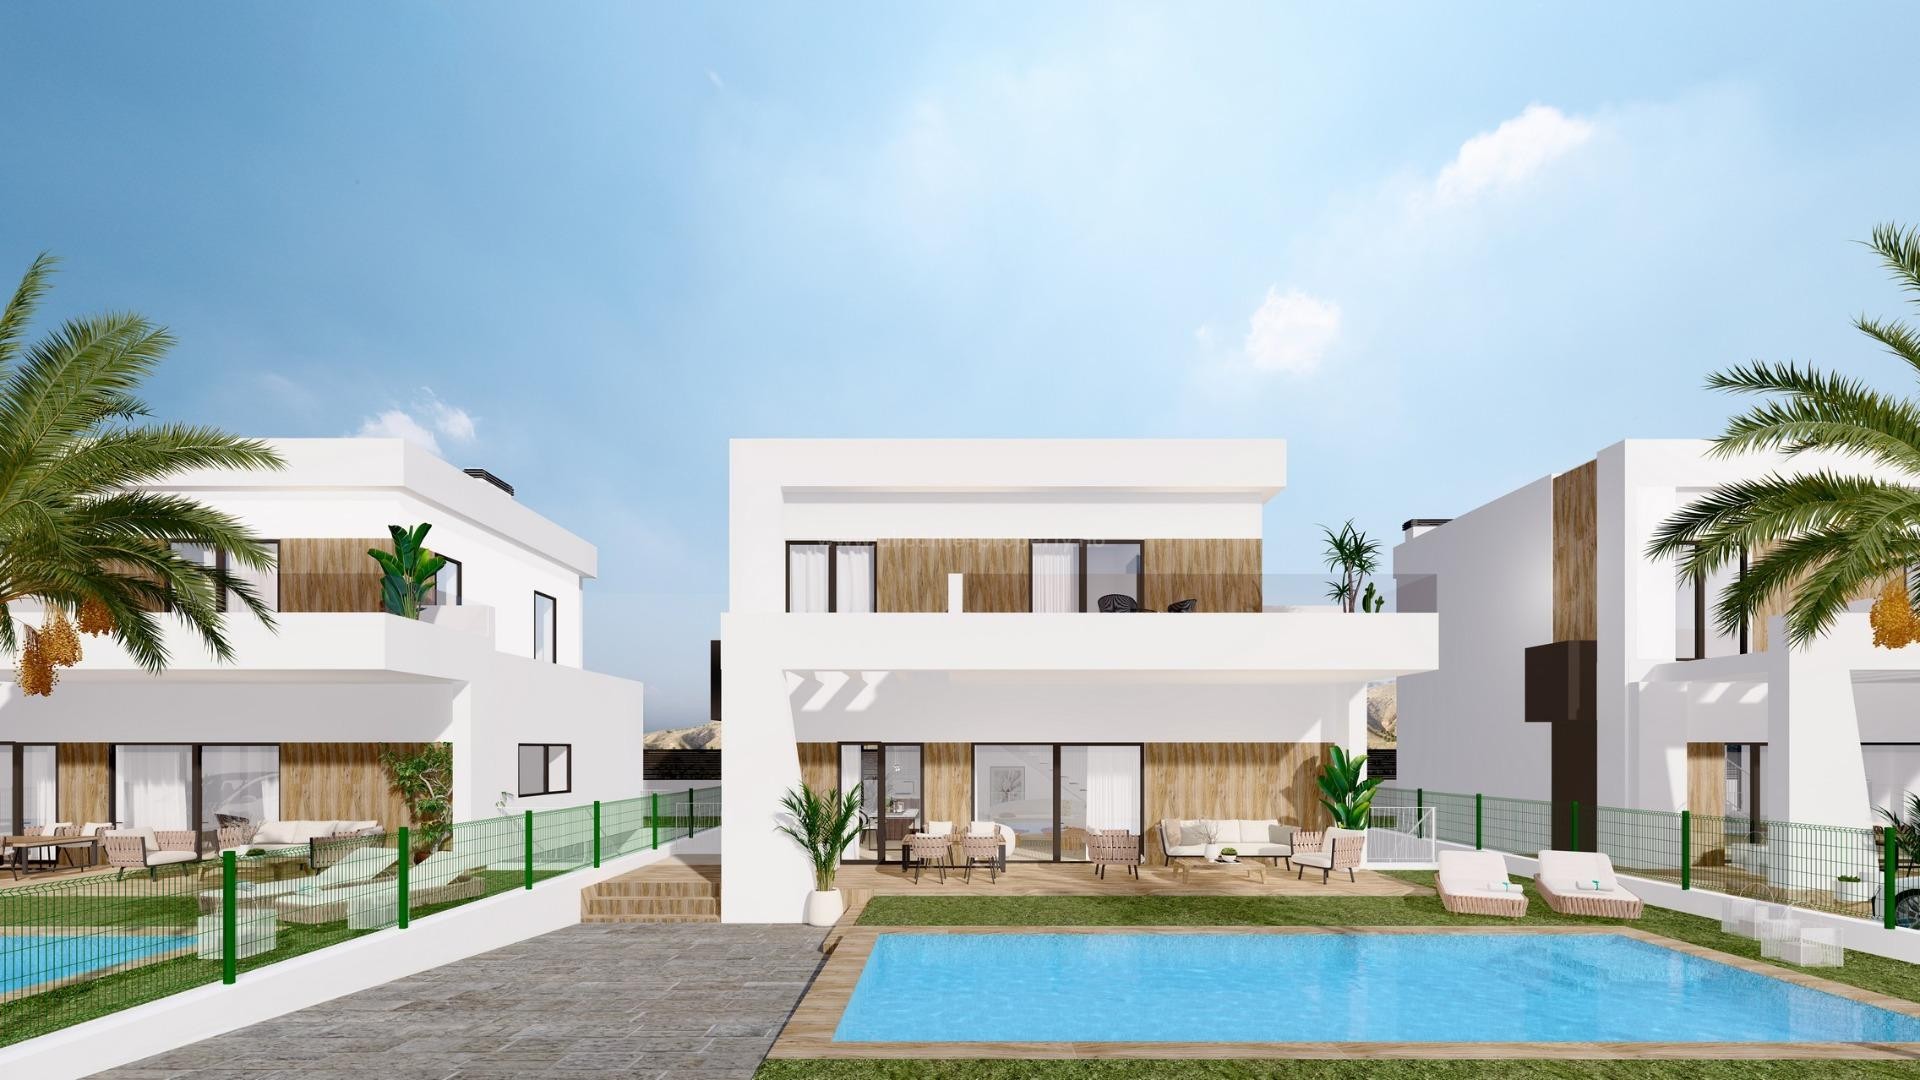 New modern luxury villas in Finestrat, 3 bedrooms, 3 bathrooms, private garden with pool and parking, large terraces, close to two golf courses